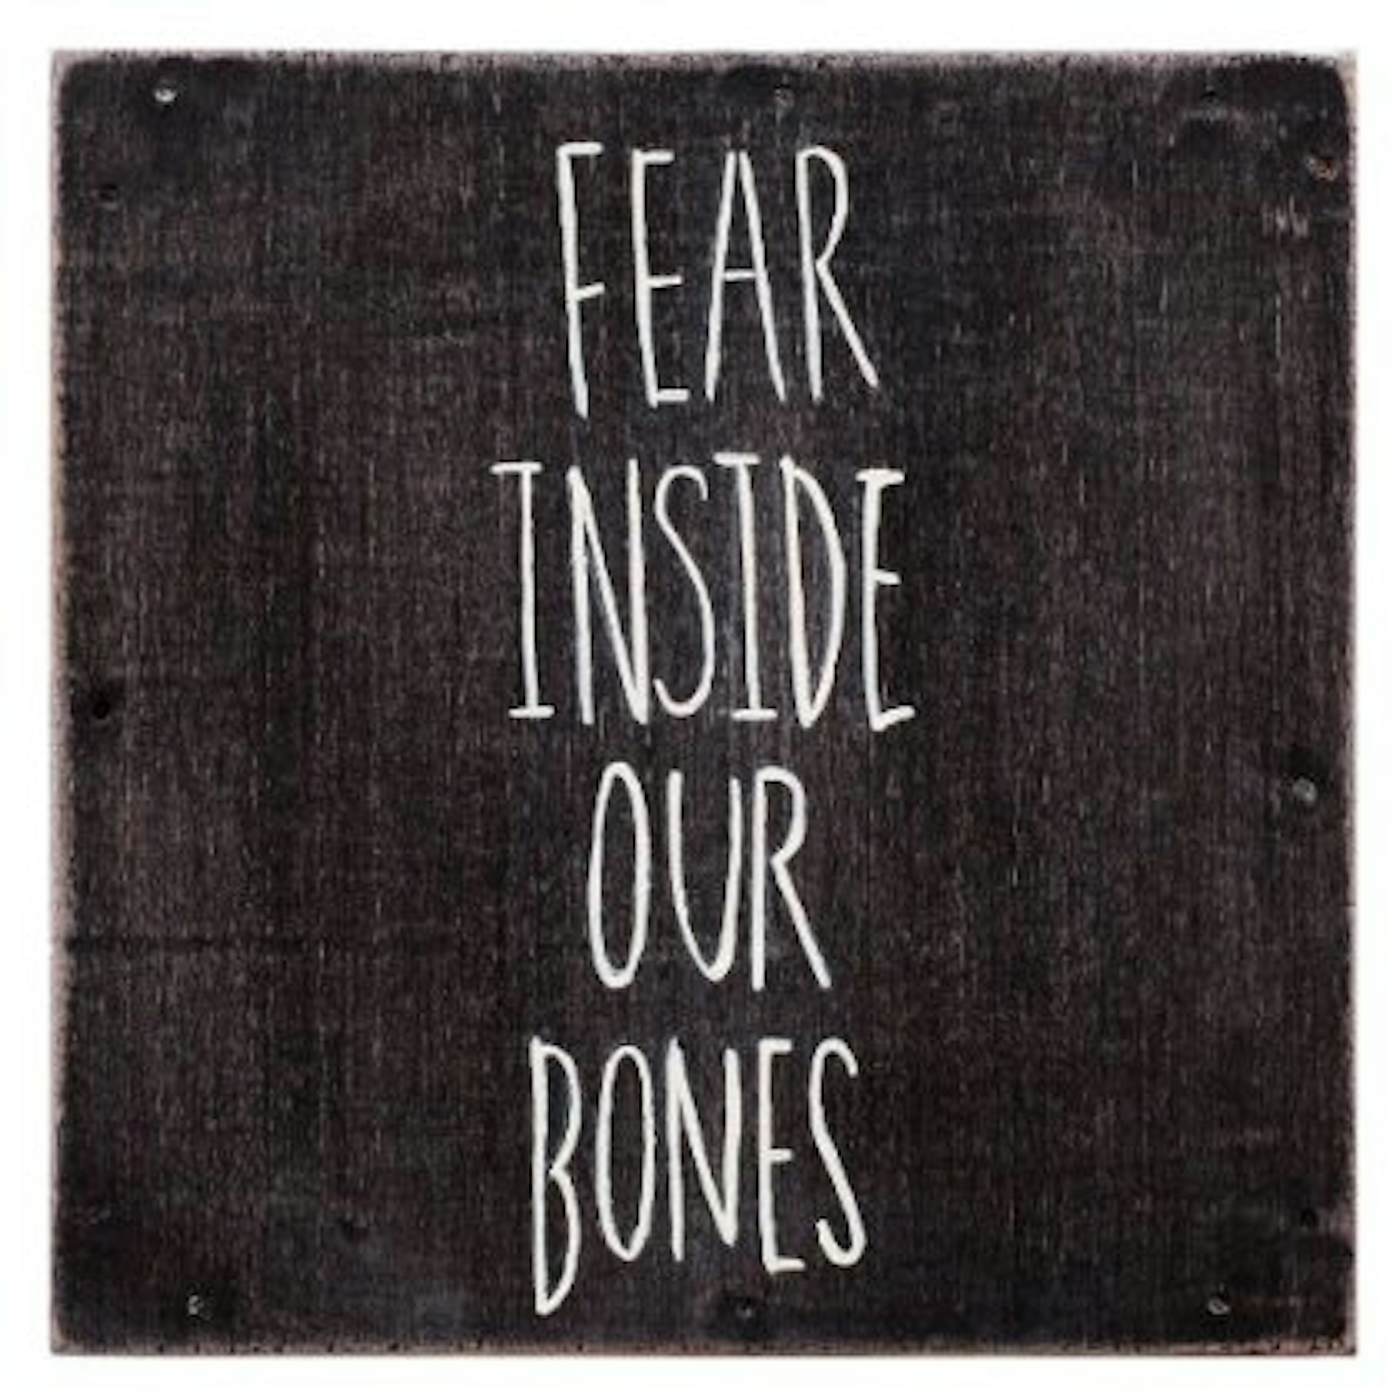 Almost FEAR INSIDE OUR BONES Vinyl Record